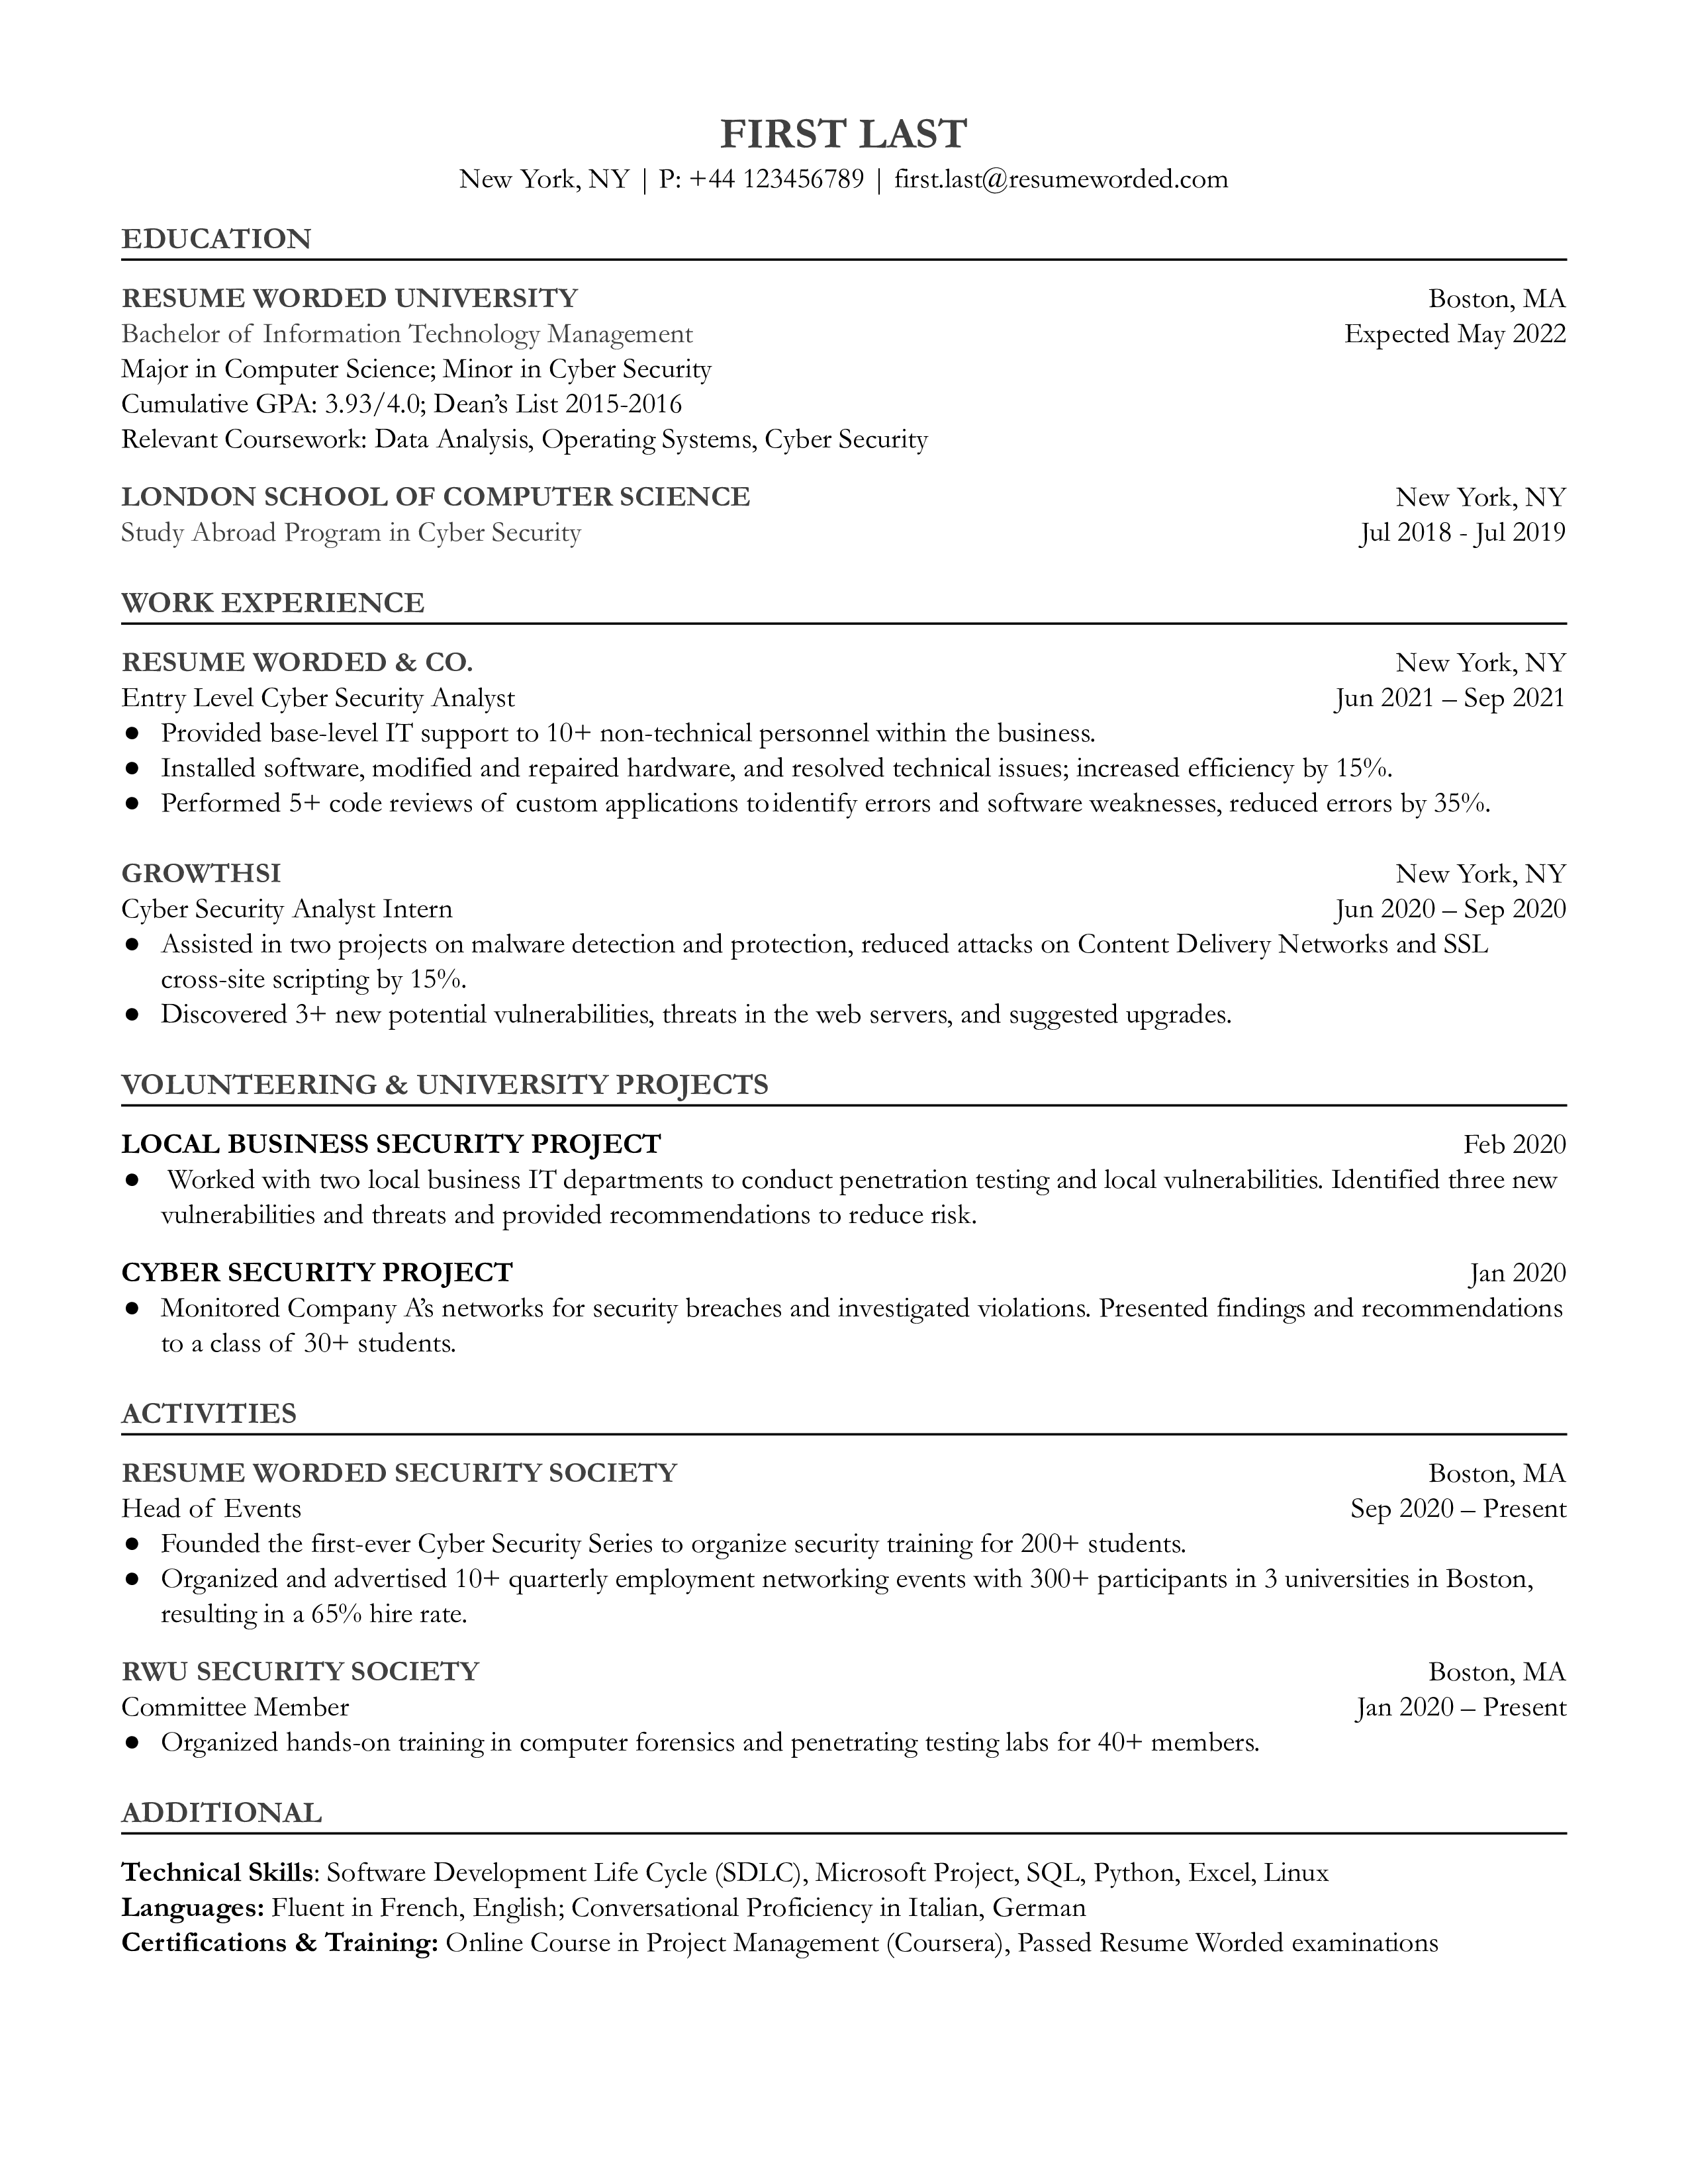 A well-structured CV for an Entry Level Cyber Security Analyst role.